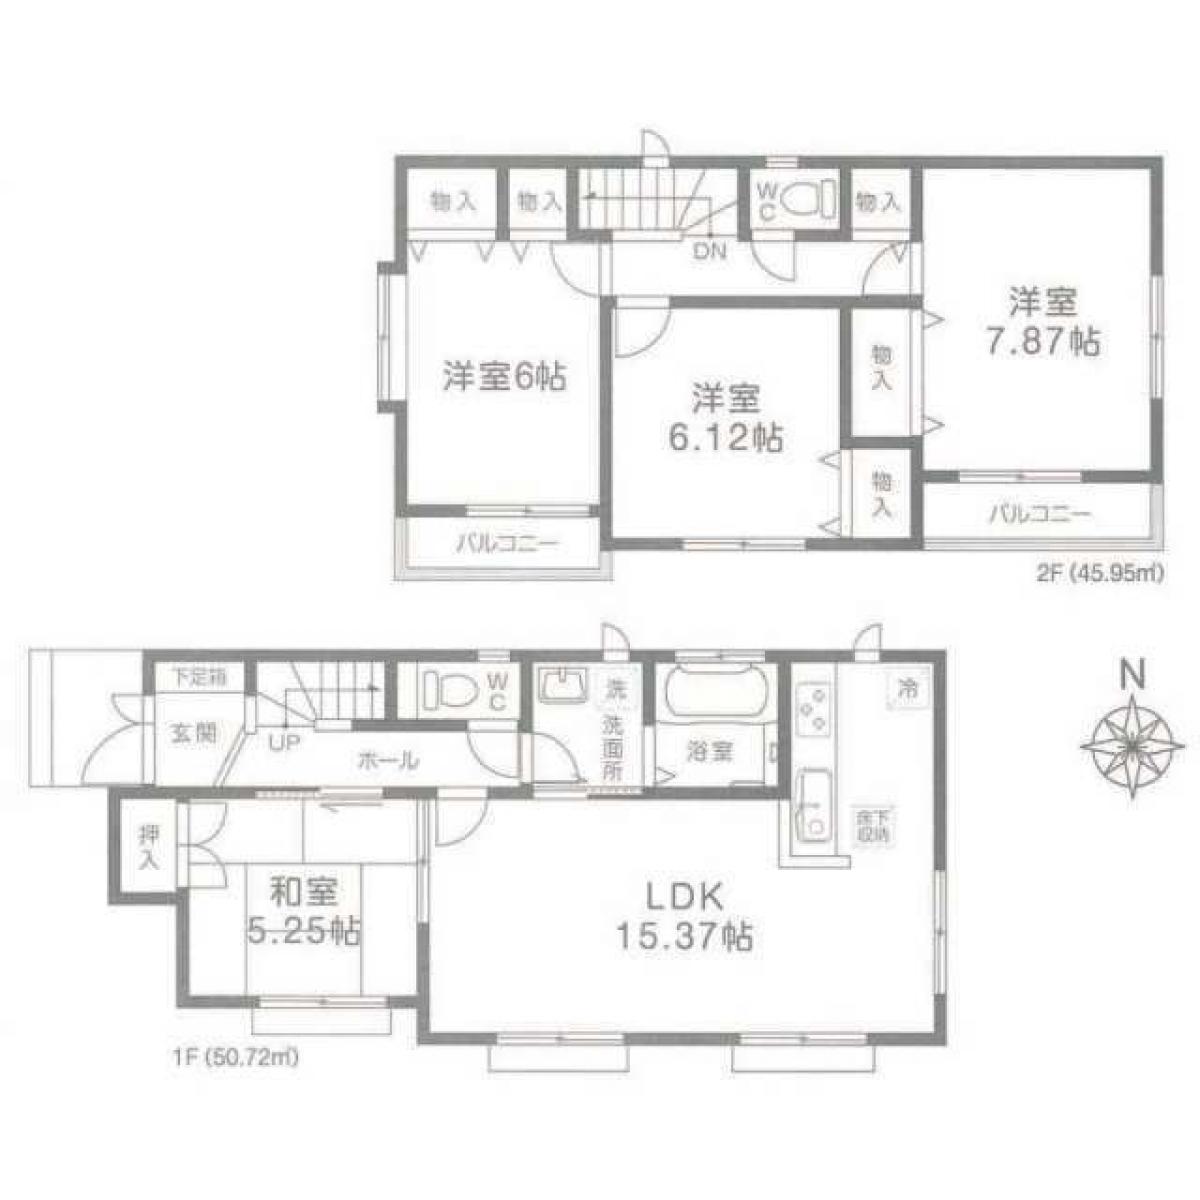 Picture of Home For Sale in Komae Shi, Tokyo, Japan